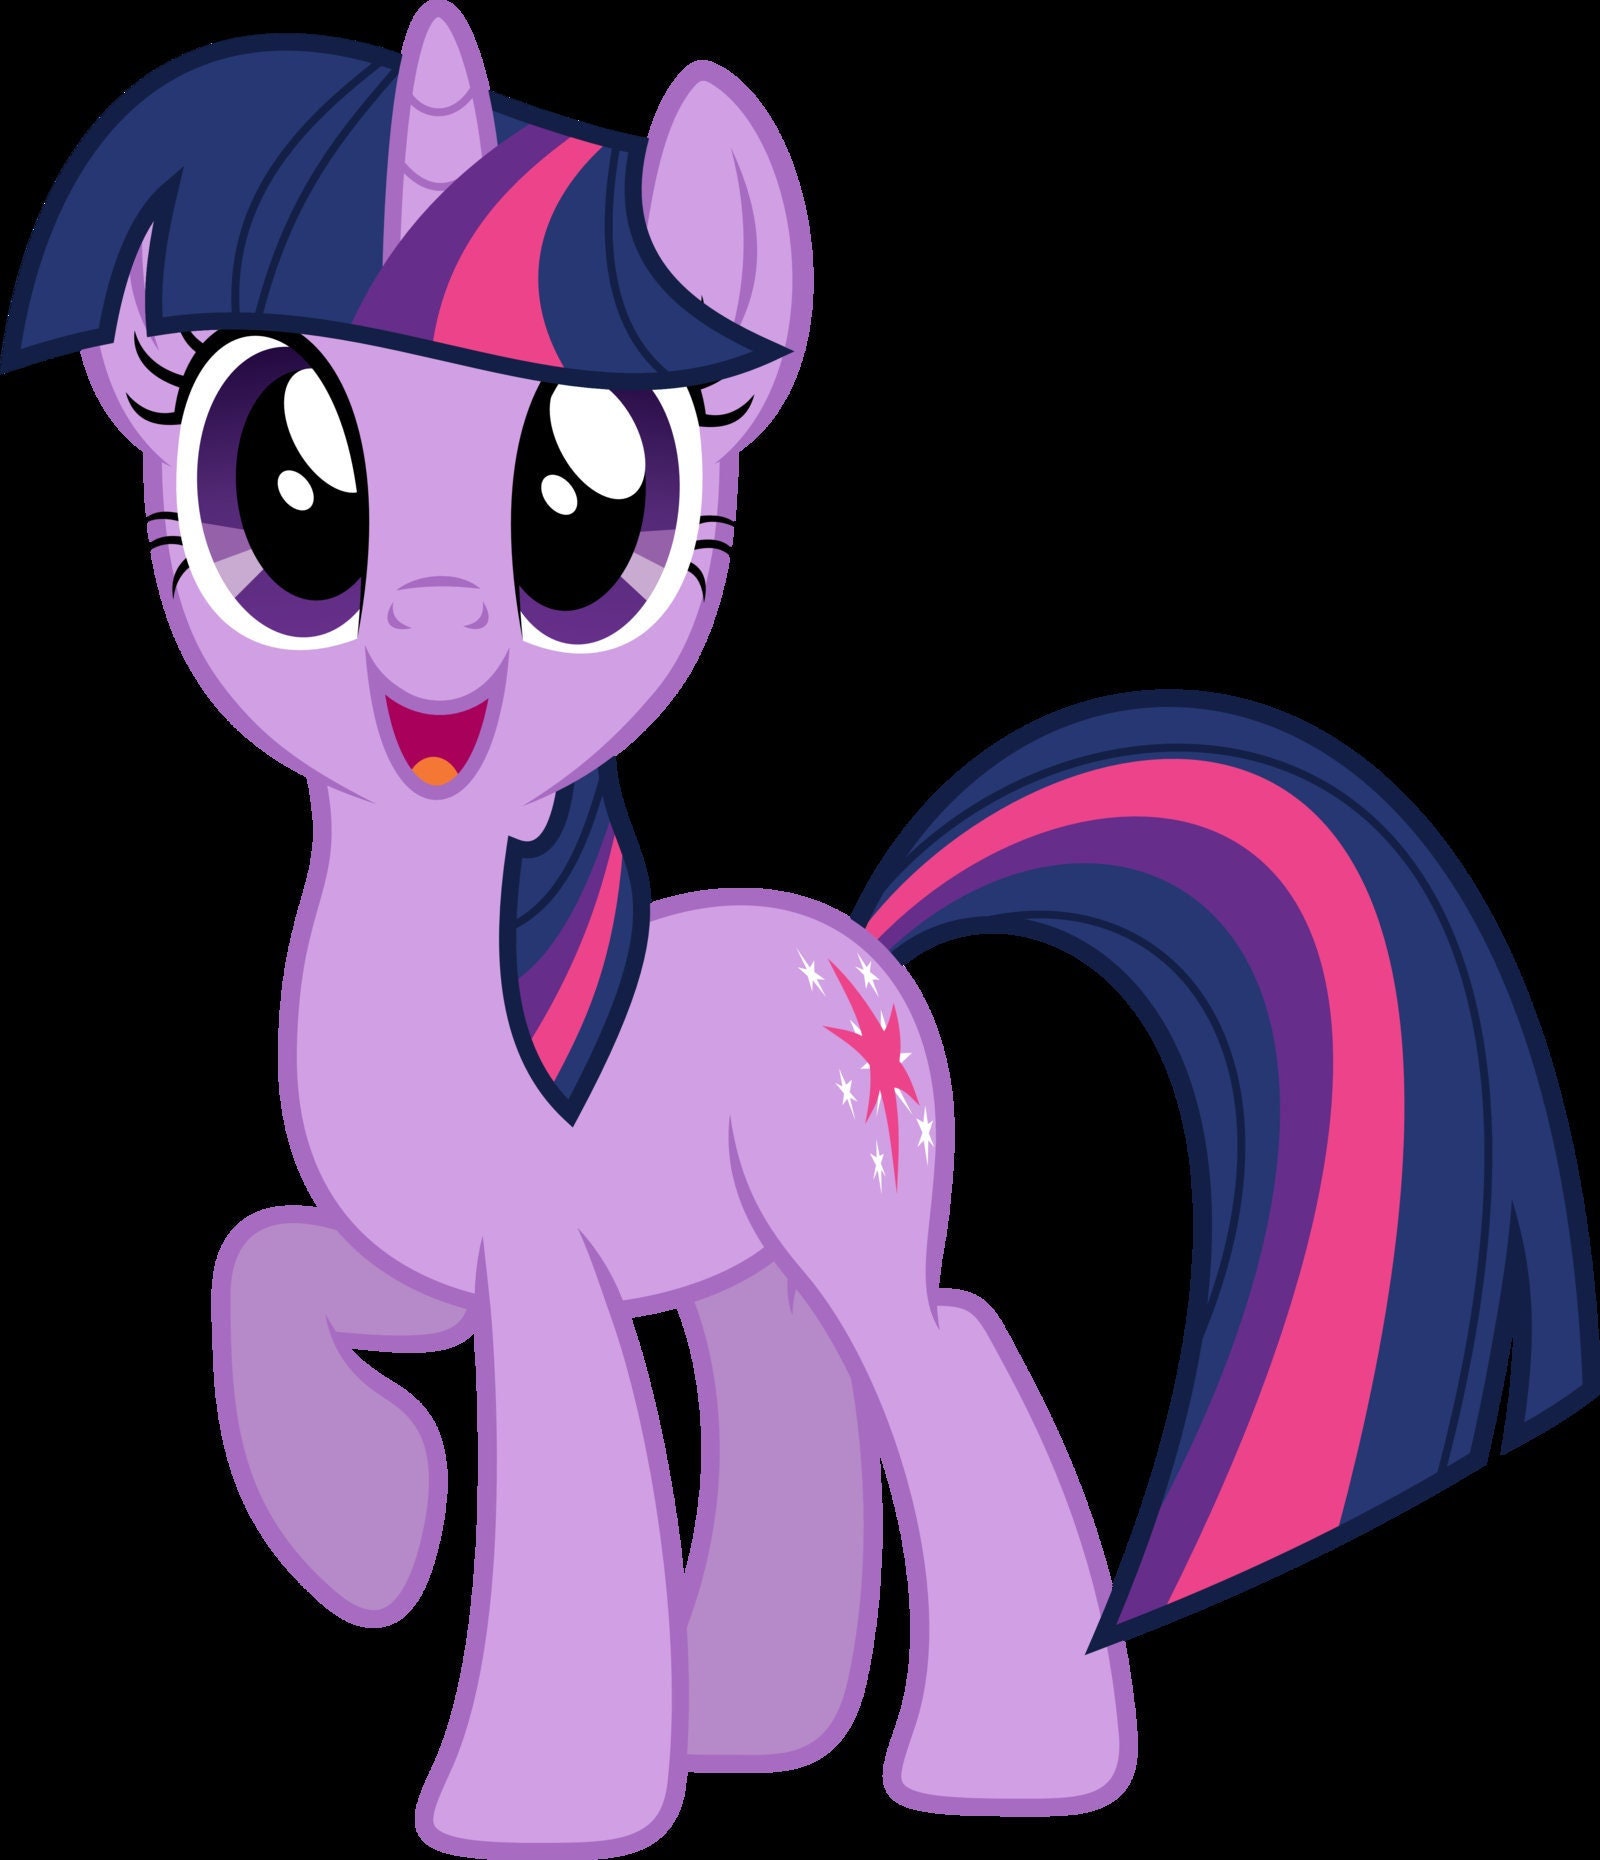 diana moscoso recommends Twilight Sparkle Pictures